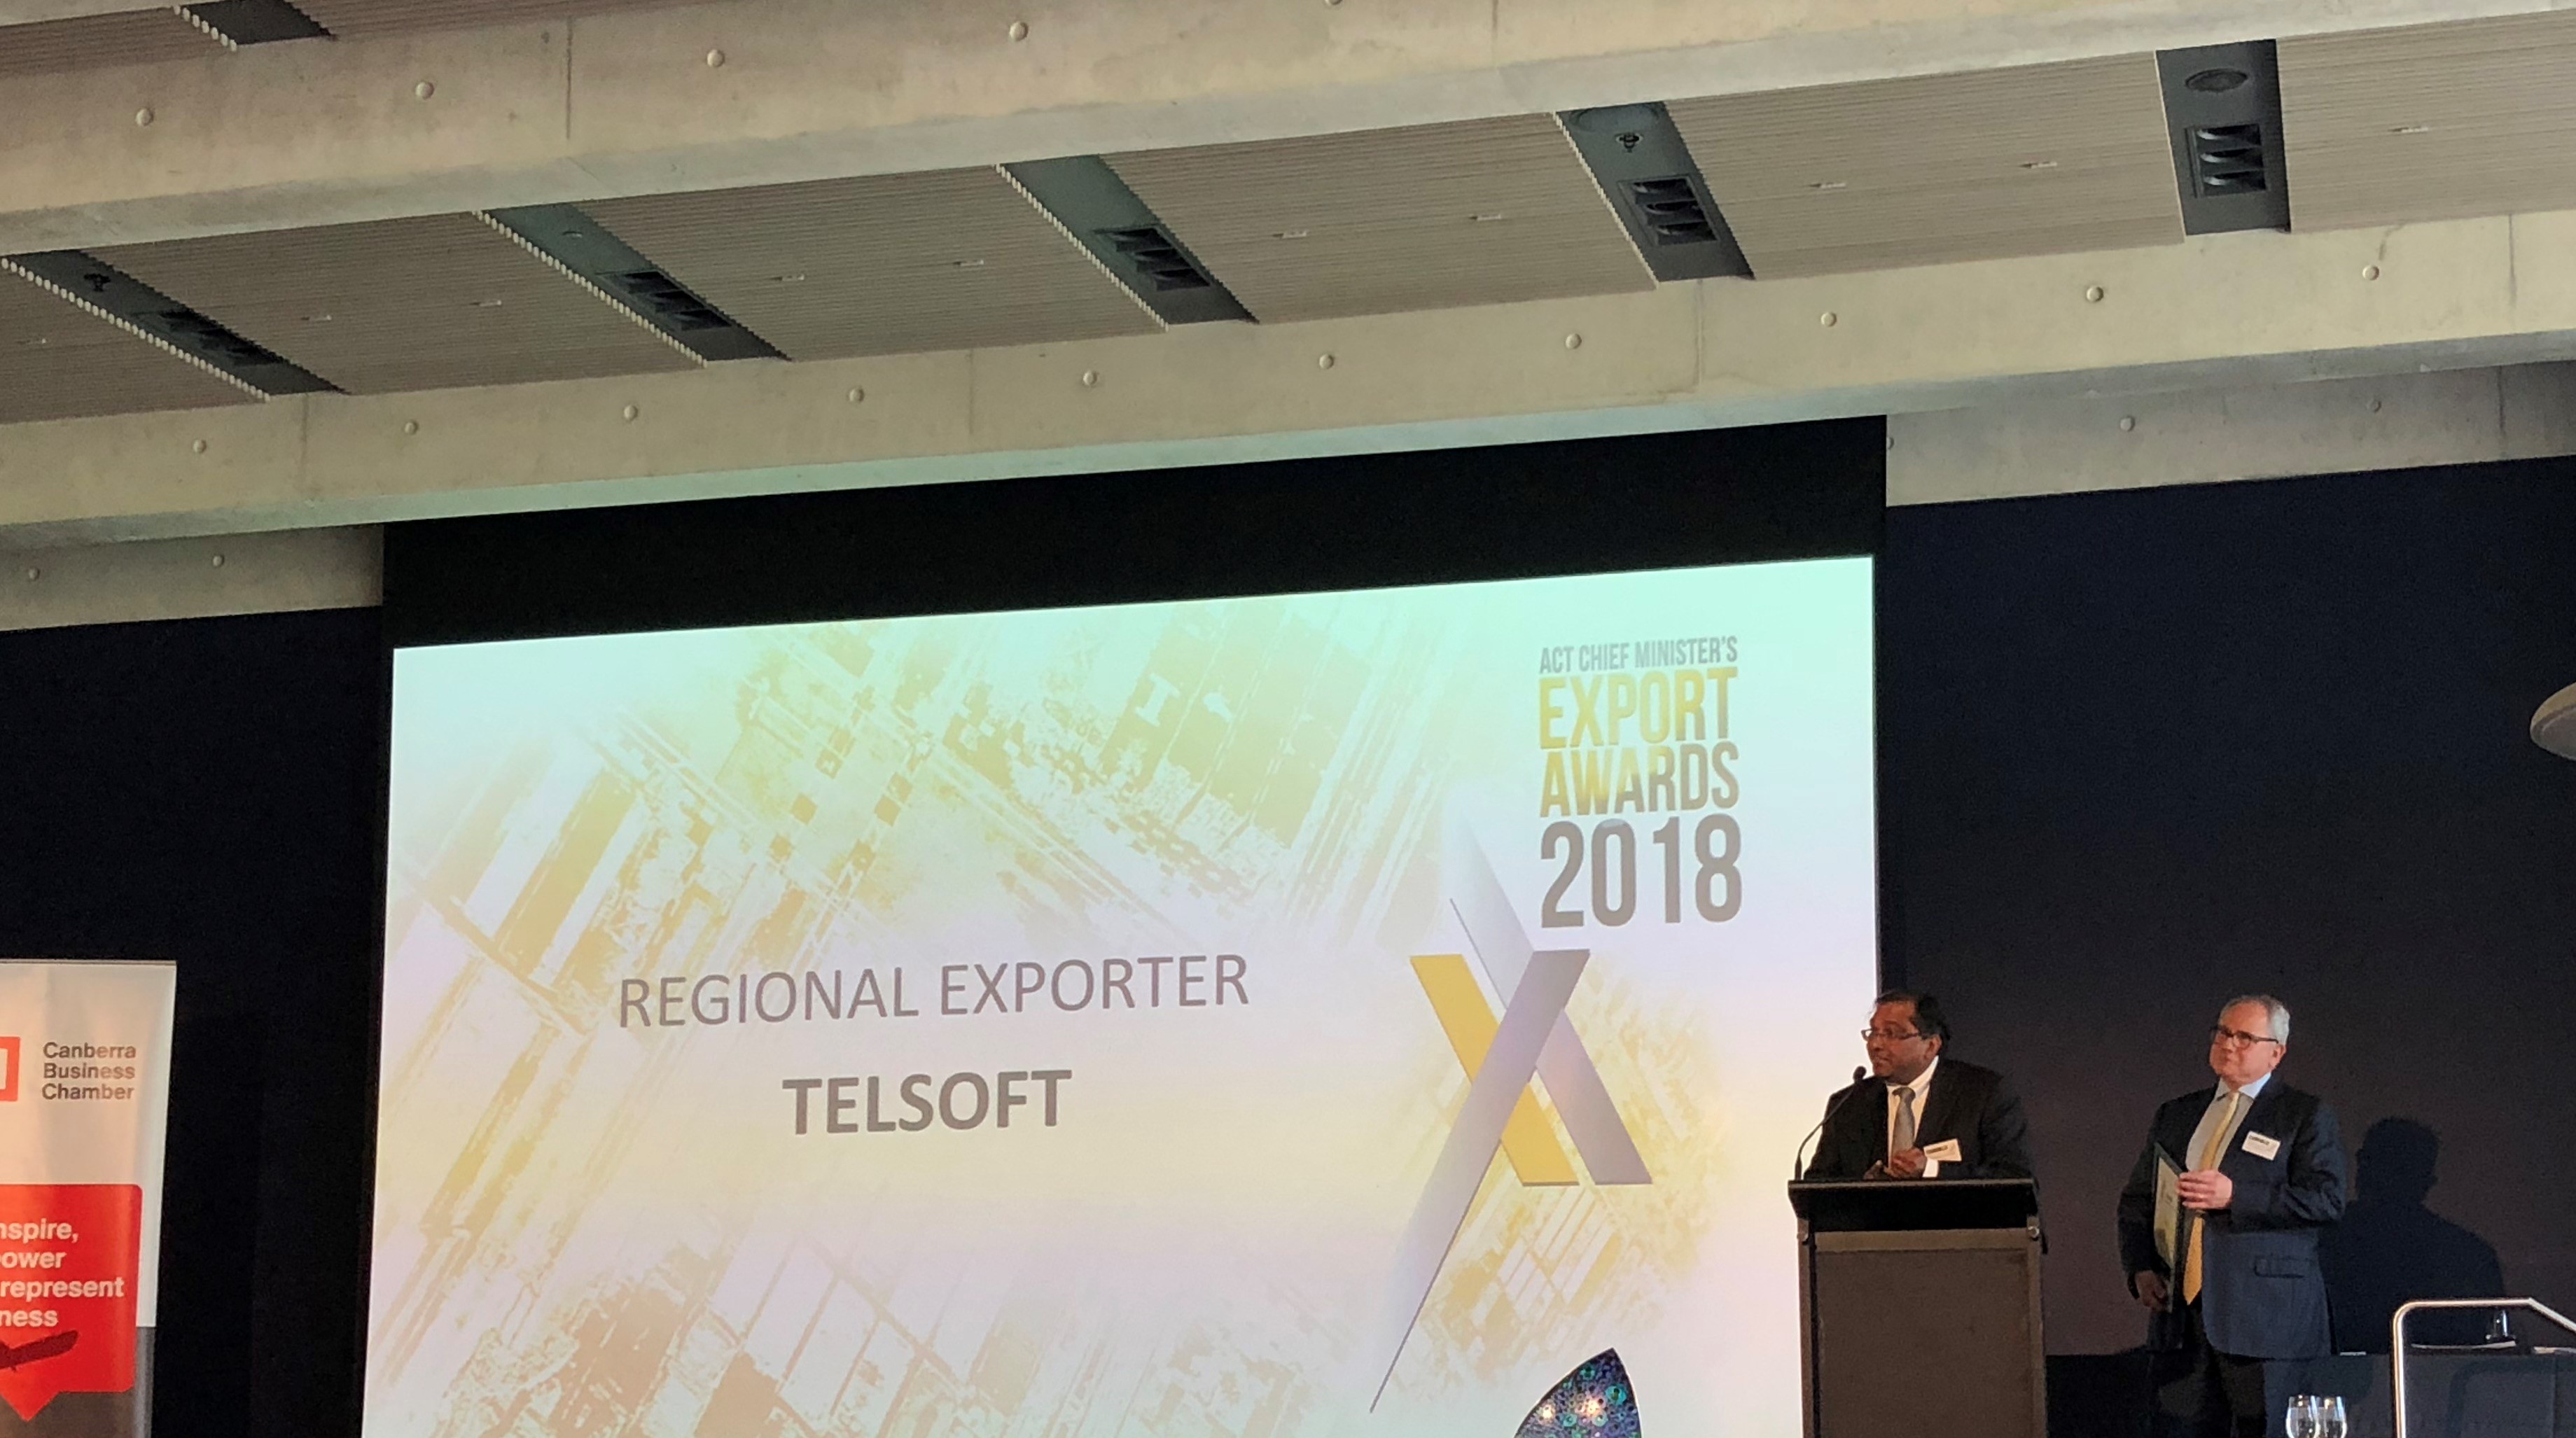 TelSoft wins Regional Exporter Award and is finalist for 56th National Export Awards 2018